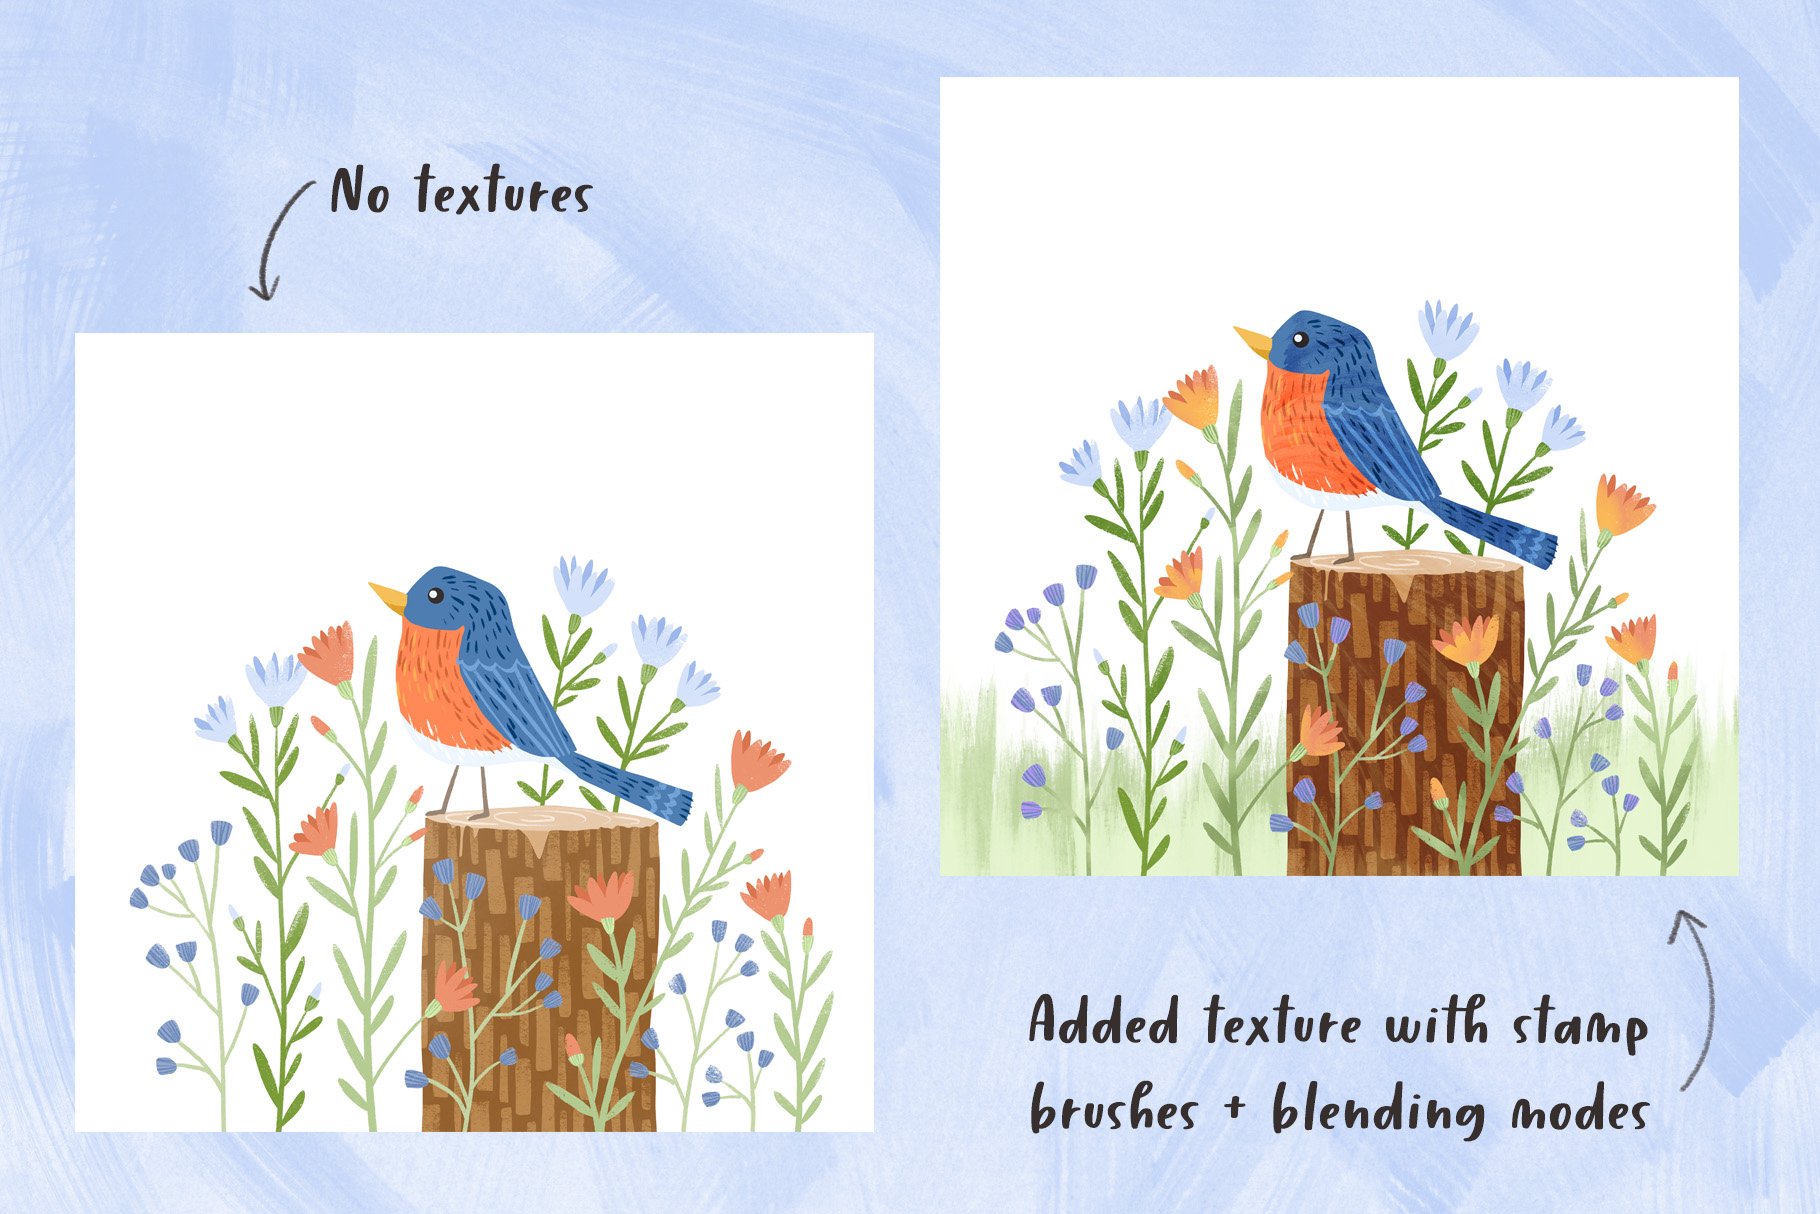 Gouache Textures + Stamp Brushespreview image.